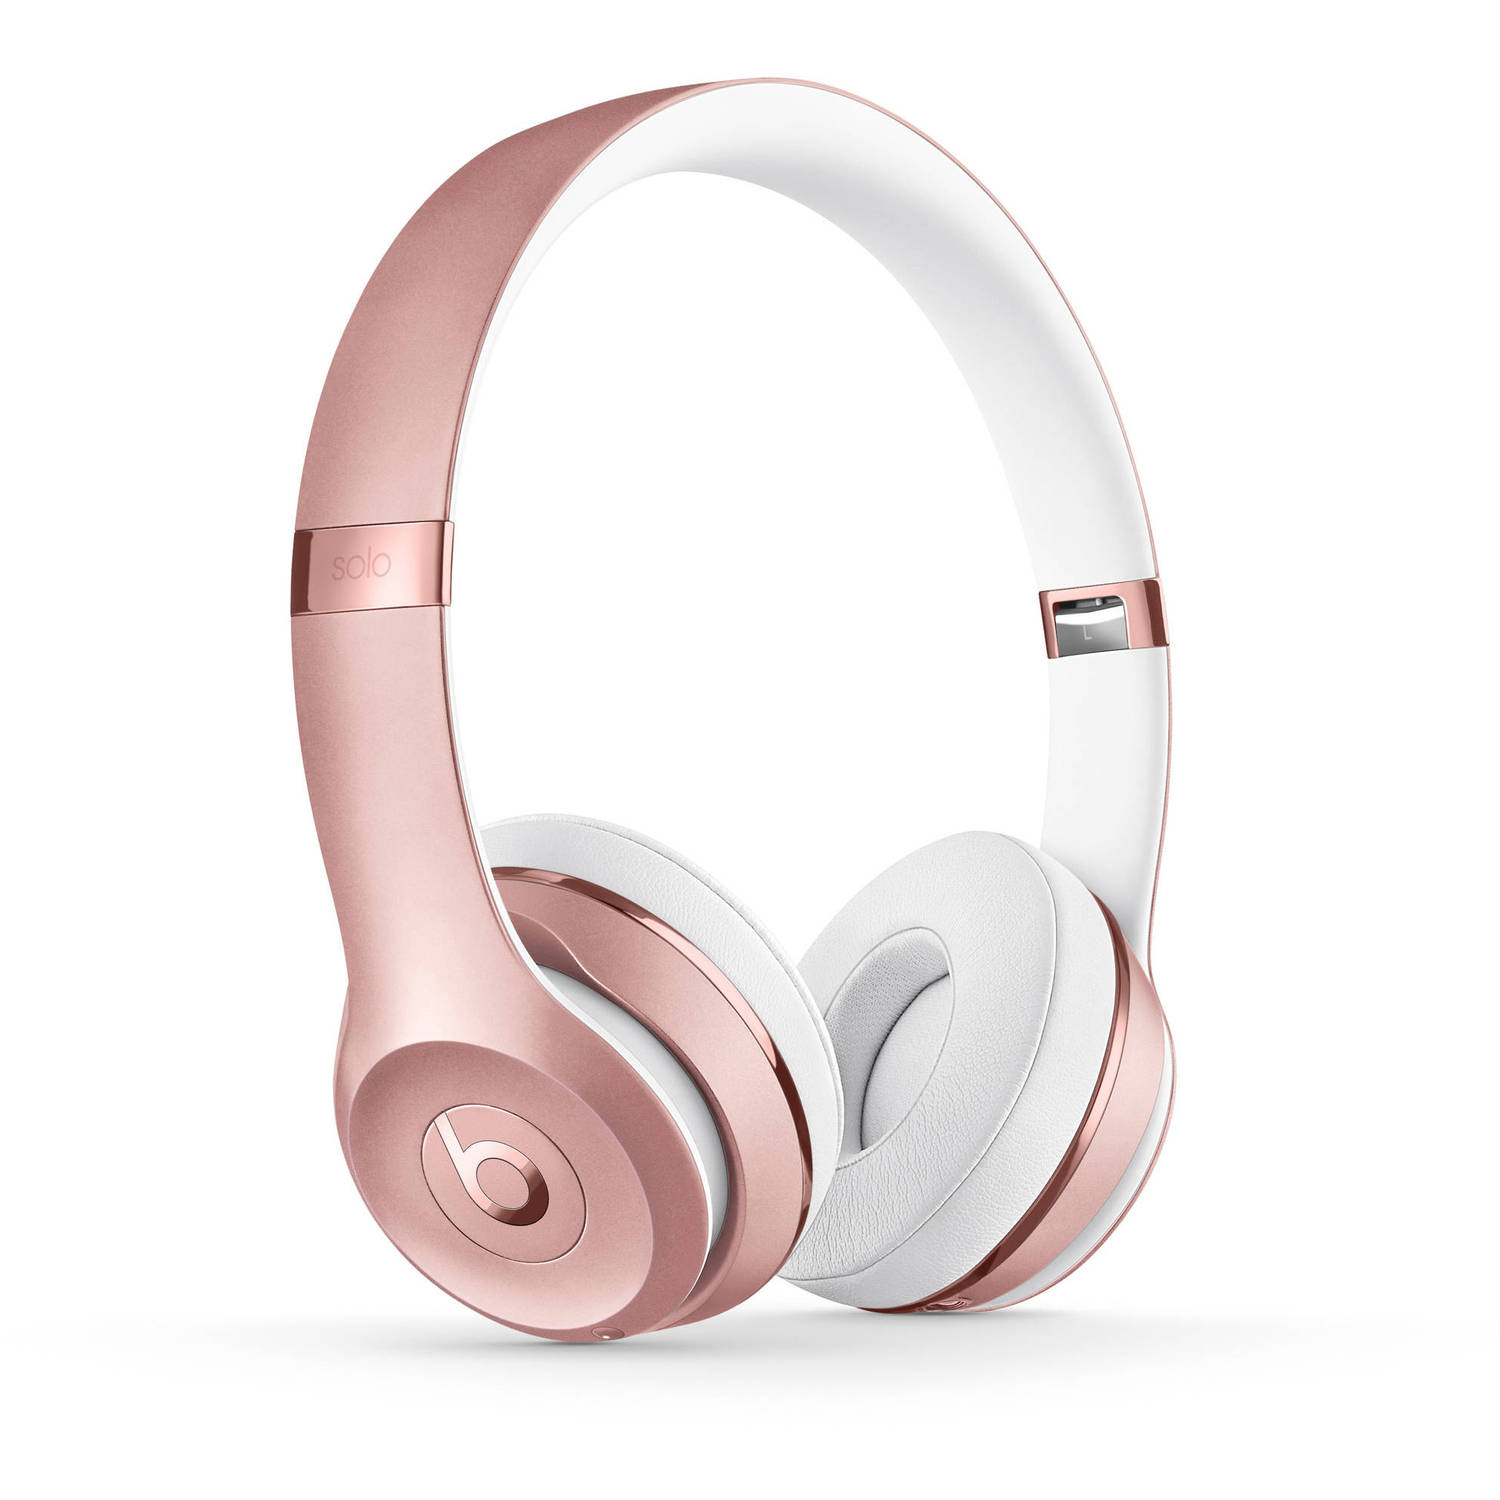 Beats by Dr. Dre Solo3 Wireless Headphones MNET2LL/A Rose Gold - US